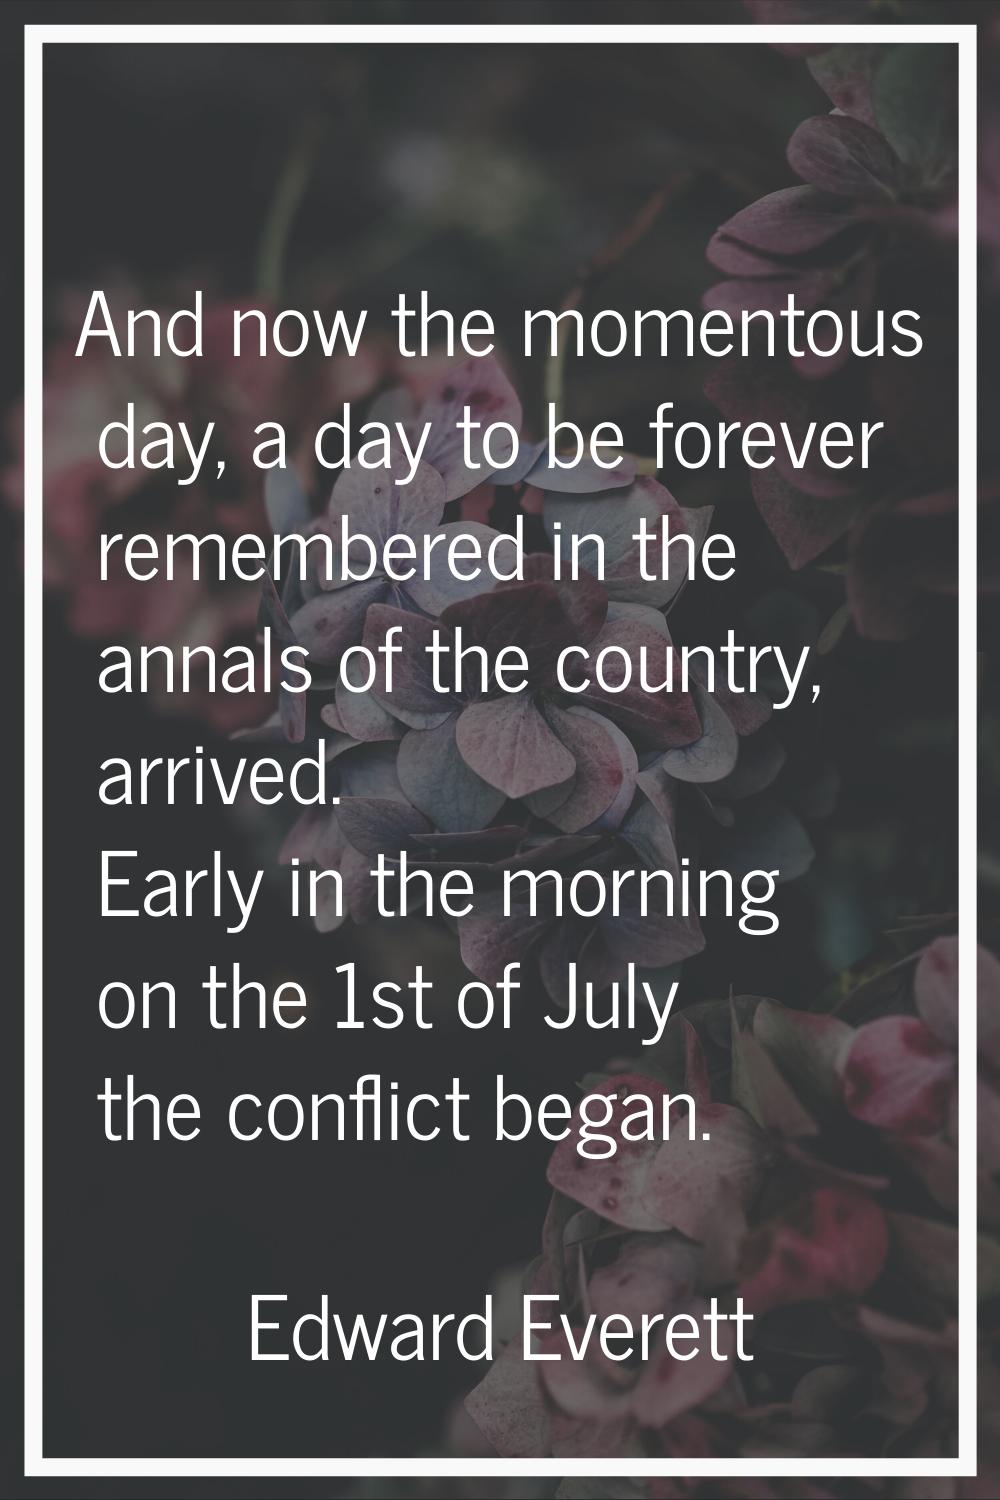 And now the momentous day, a day to be forever remembered in the annals of the country, arrived. Ea